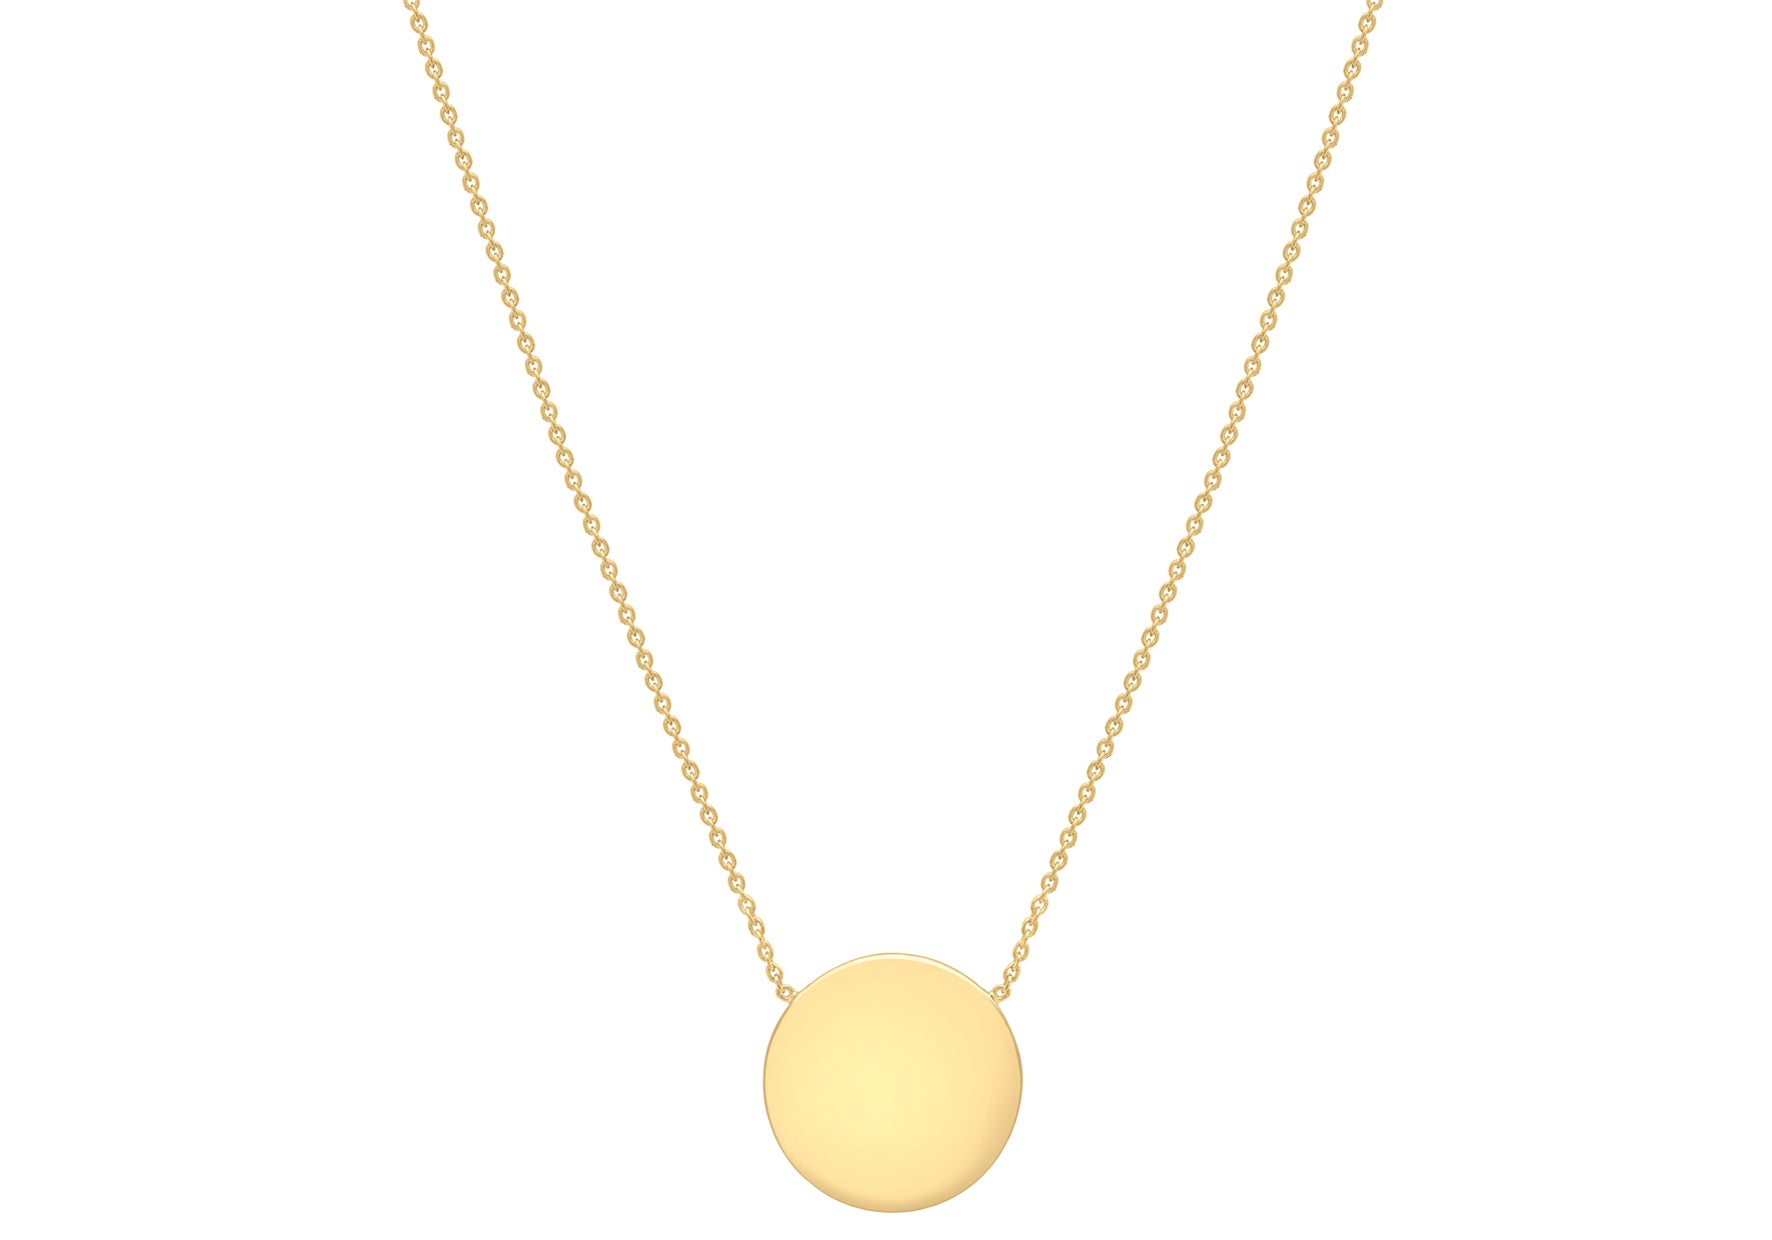 Personalised 9ct Gold Message Disc Necklace | Posh Totty Designs